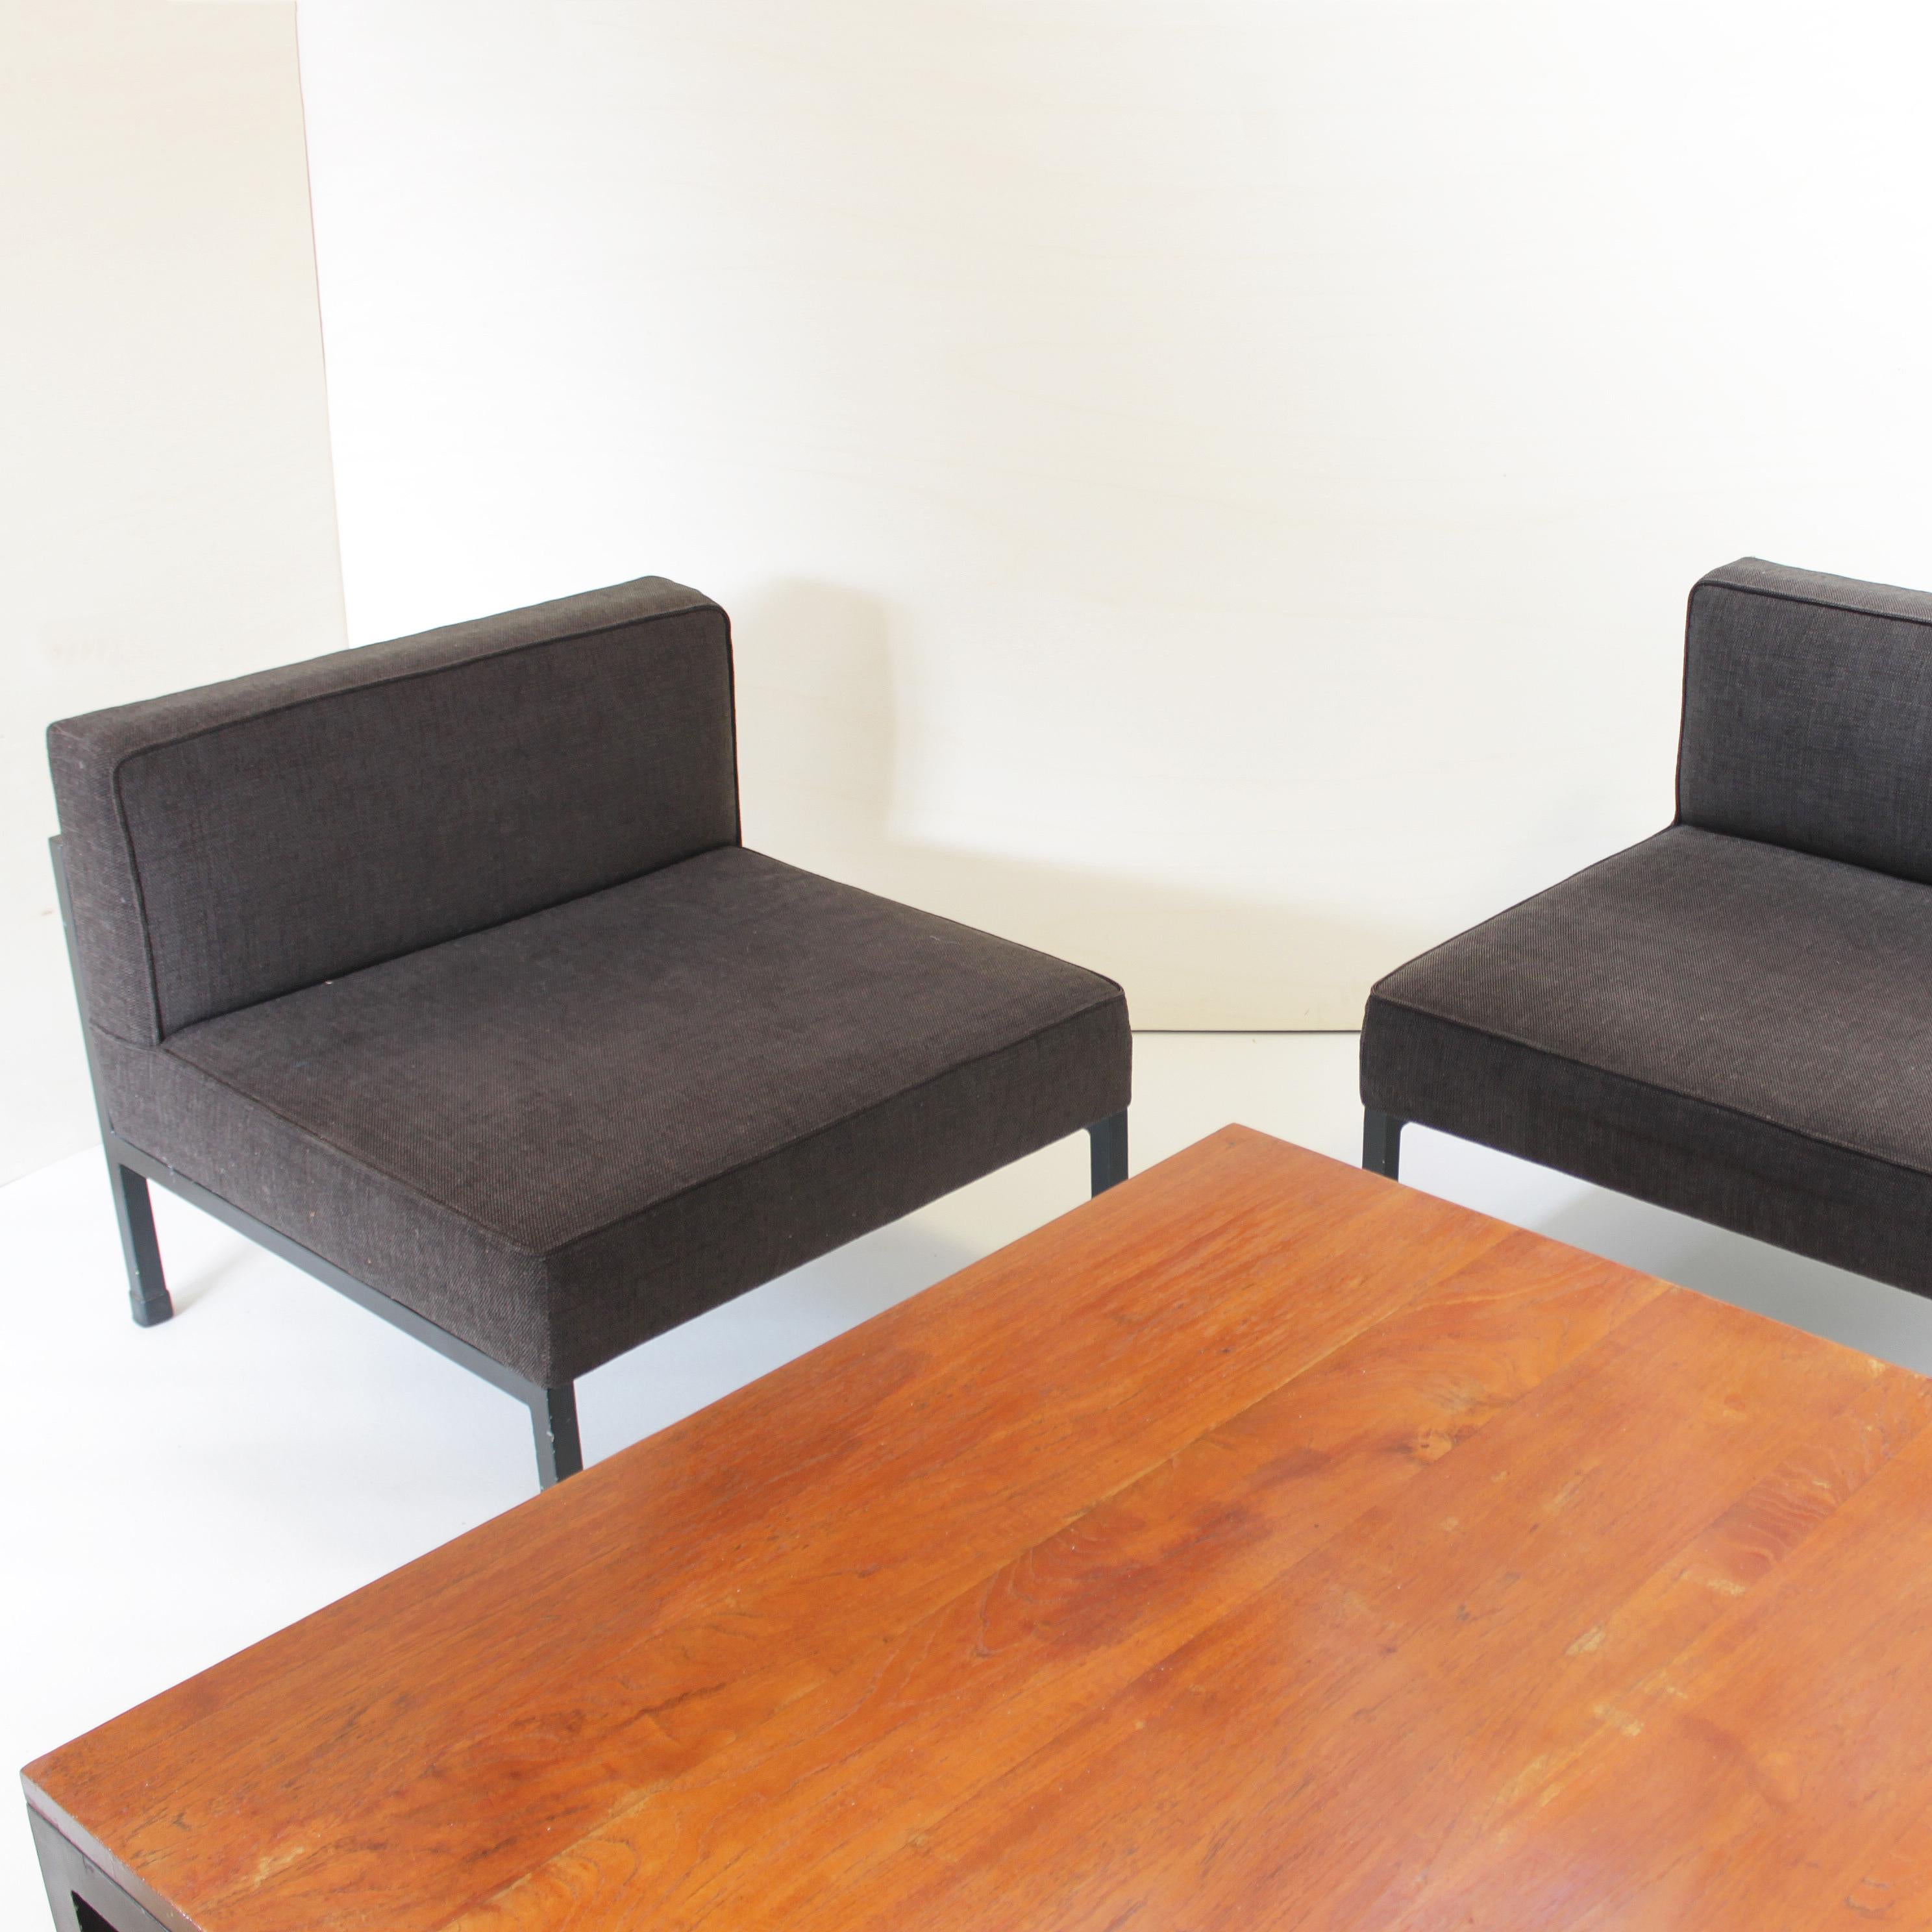 Coffee Table and Two '2' Armchairs by Wim Den Boon, Netherlands, 1958 For Sale 2